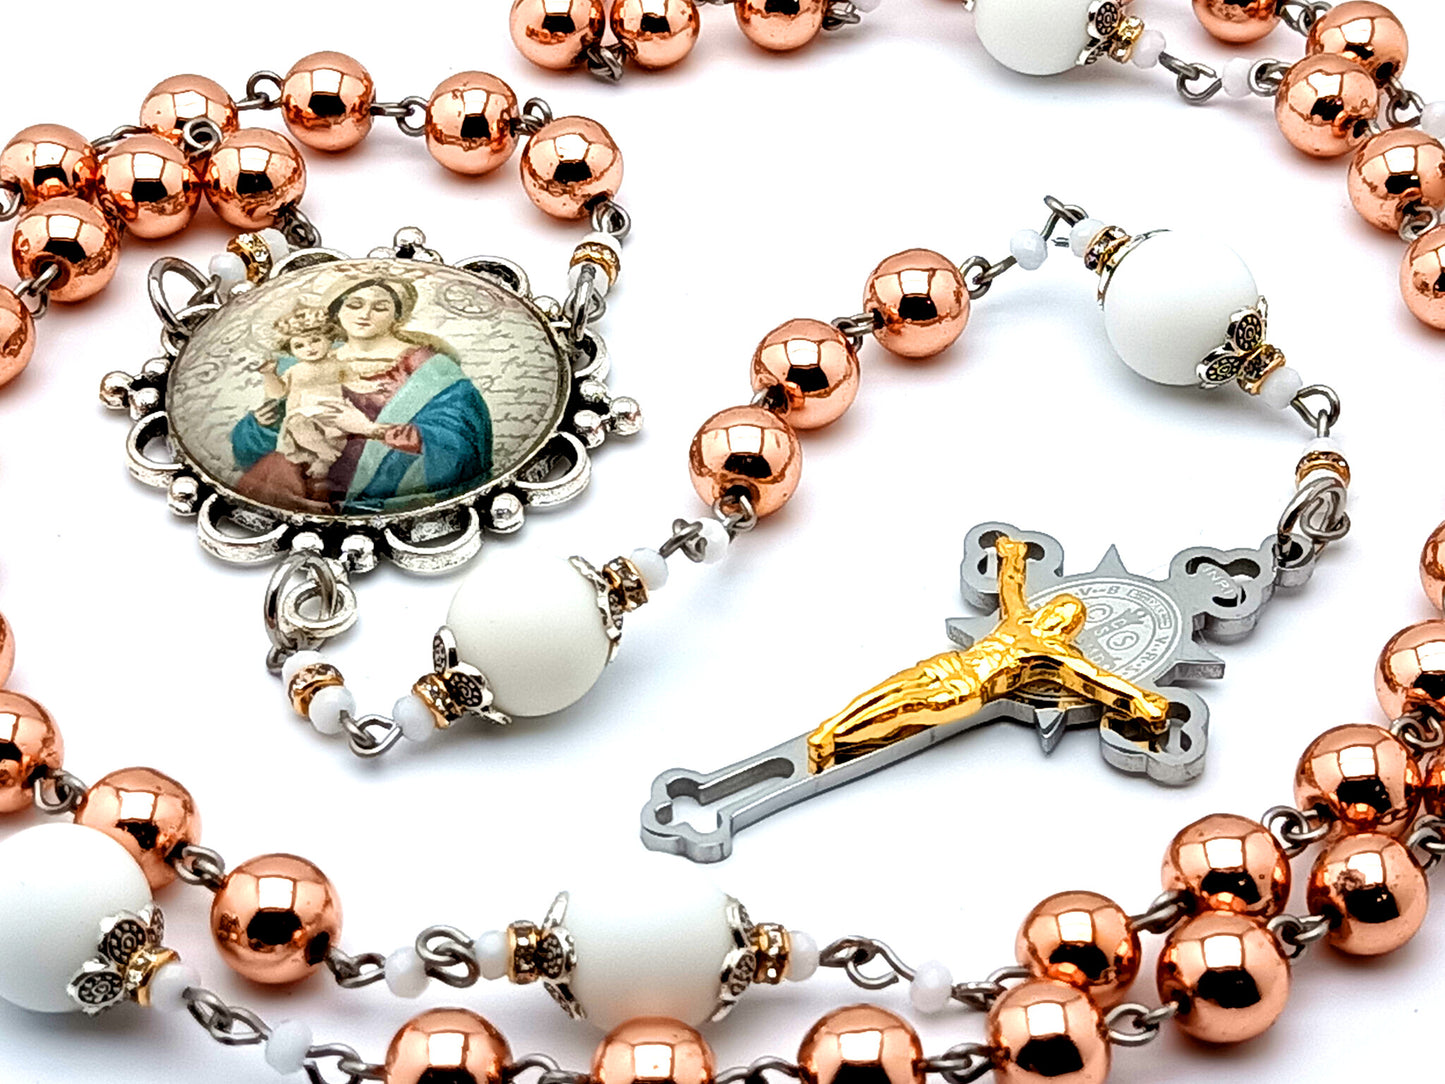 Madonna and Child Jesus unique rosary beads with rose gold hematite and alabaster gemstone beads and Saint Benedict stainless steel and gold crucifix.